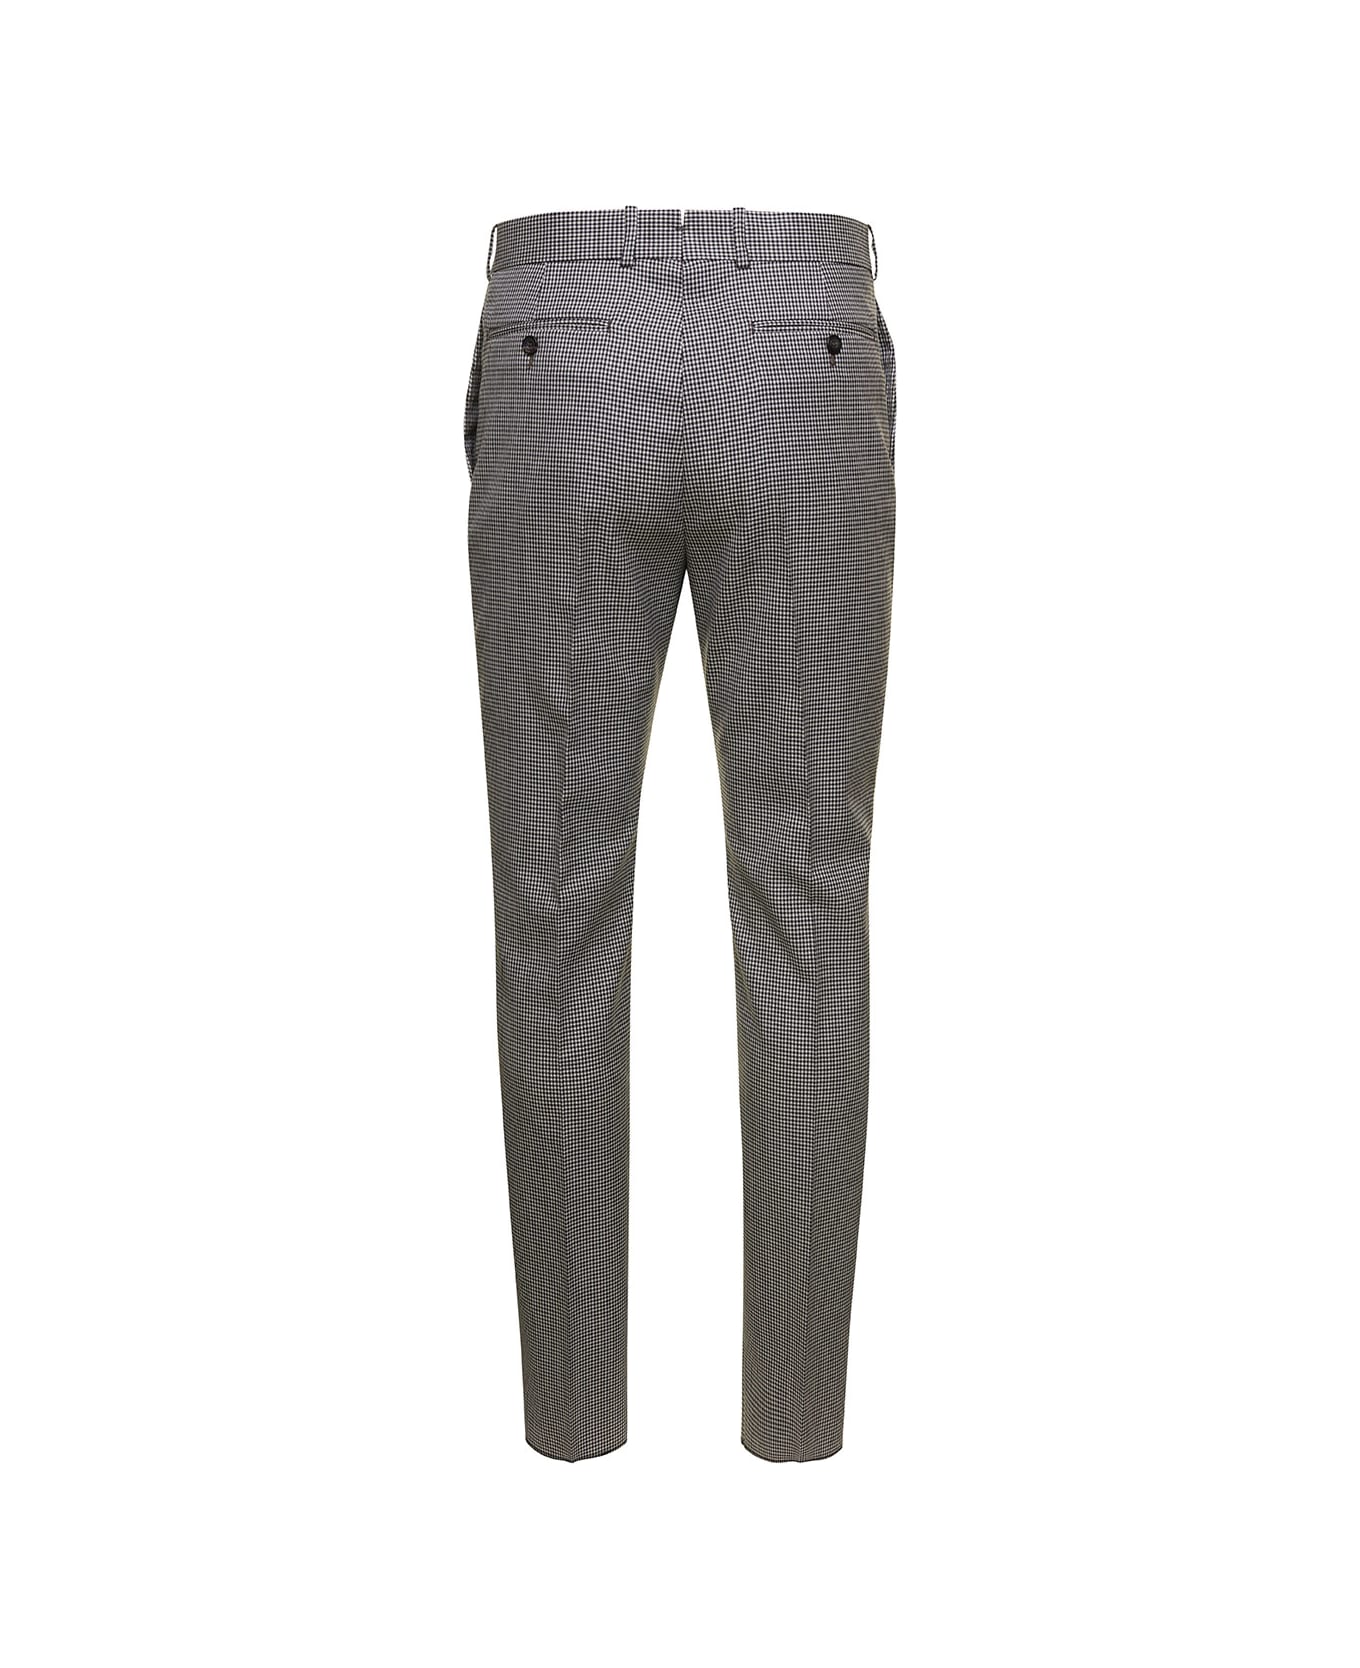 Alexander McQueen Grey Cigarette Pants With Houndstooth Pattern In Wool Man - Grey